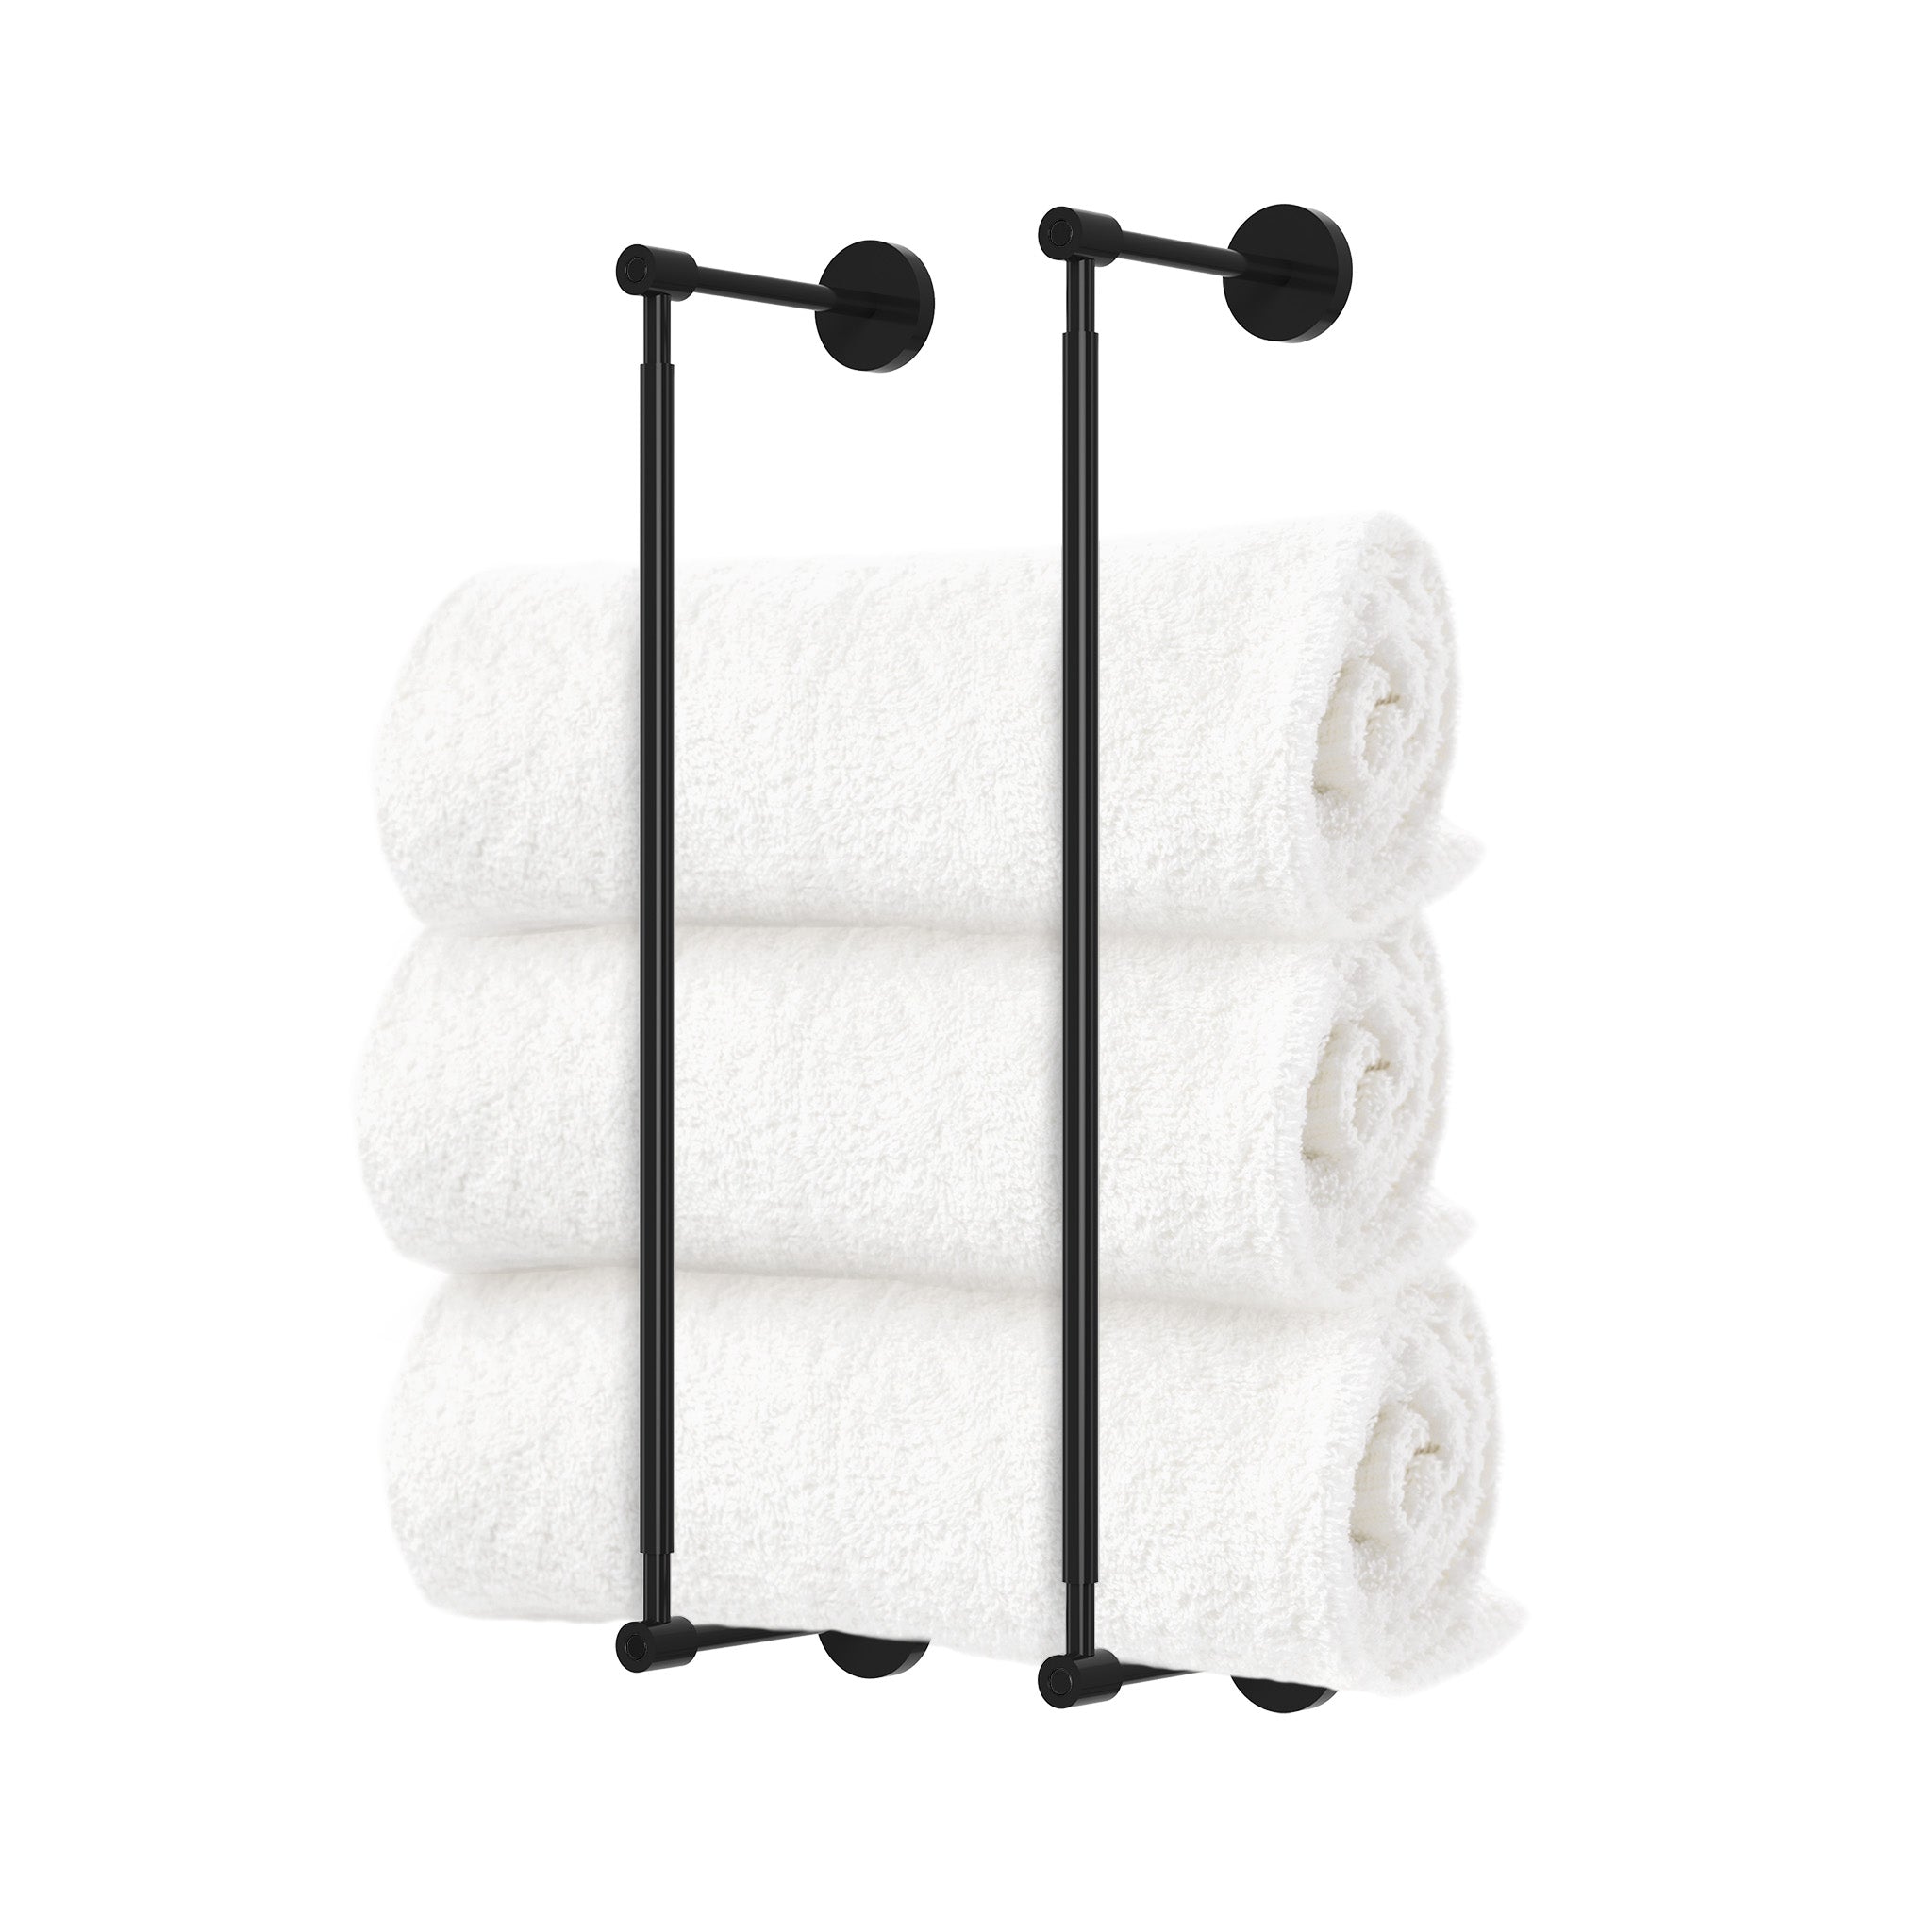 Black and black head towel rack 18 inch dutton brown hardware